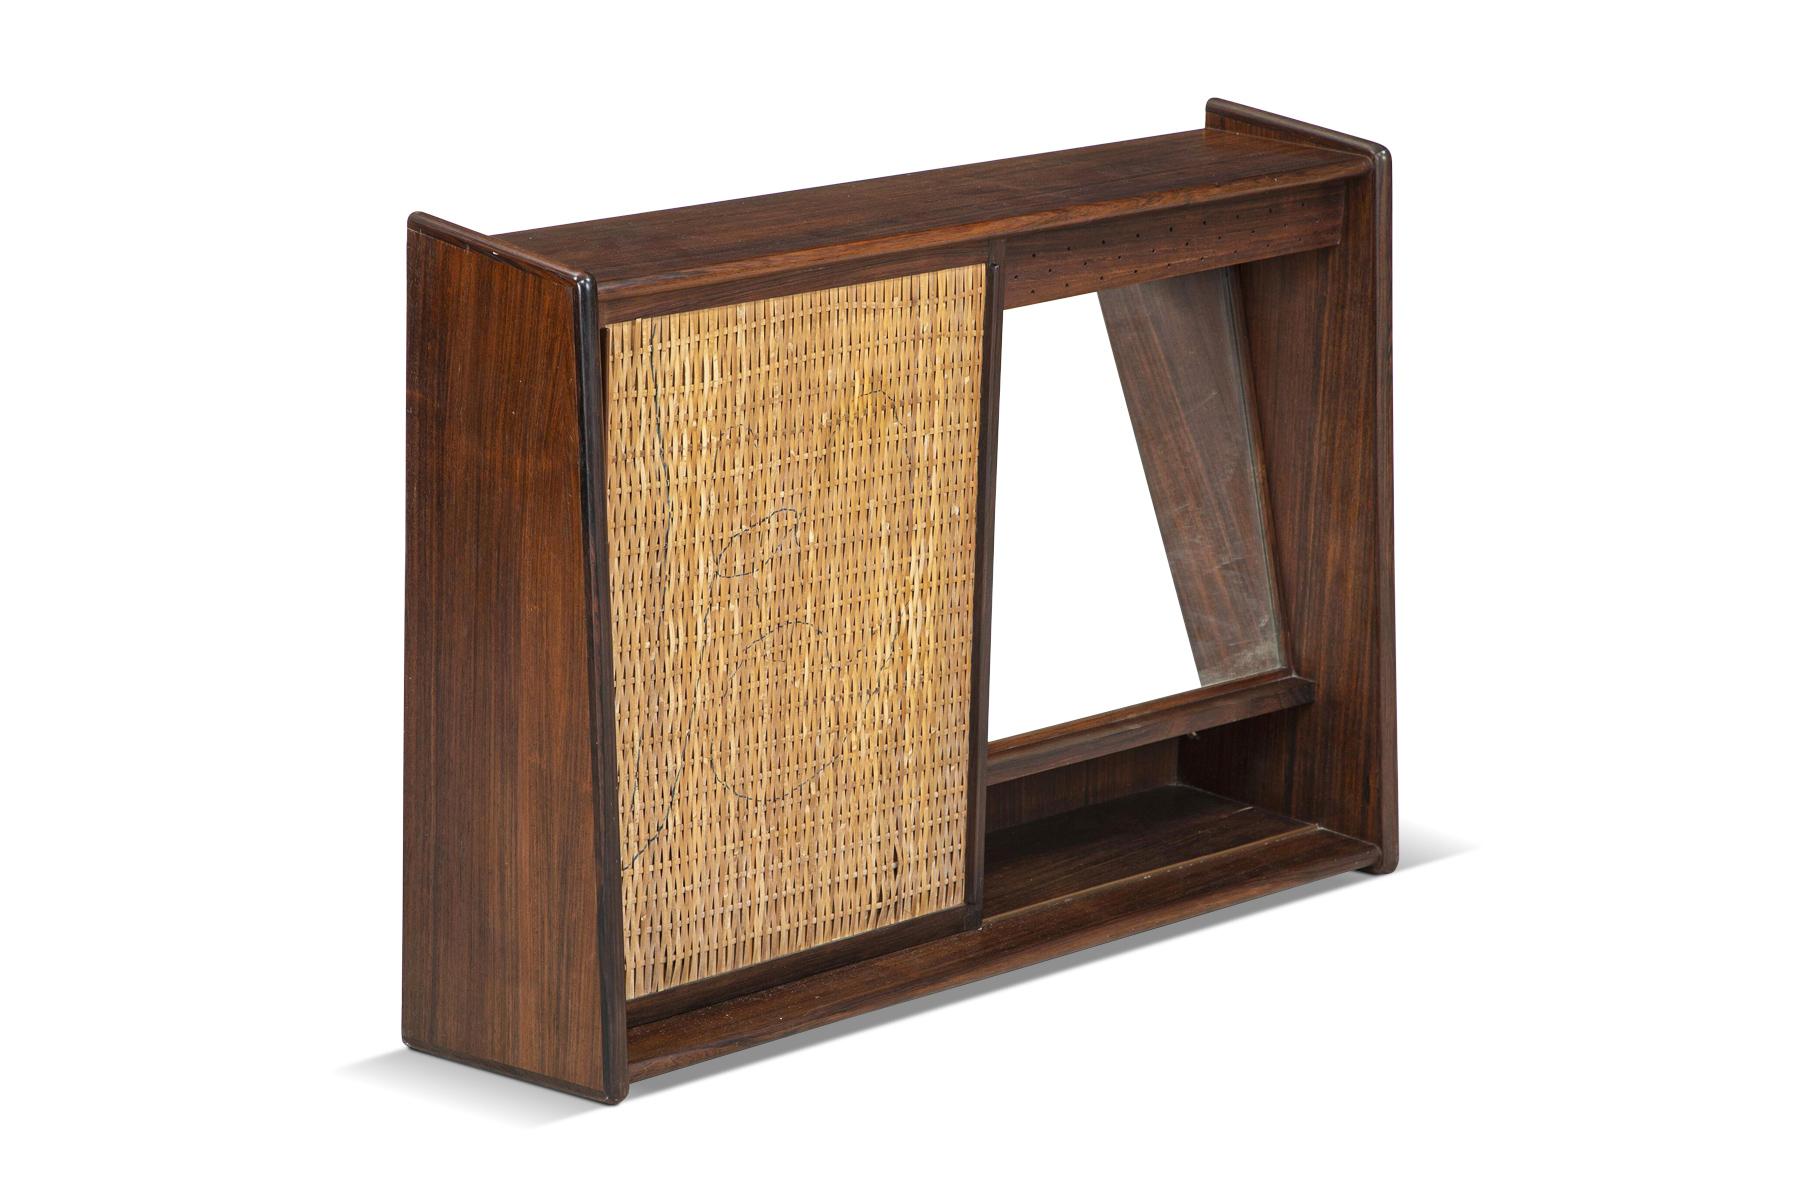 Danish Modern Wall Mounted Rosewood + Cane Vanity D In Excellent Condition For Sale In Berkeley, CA